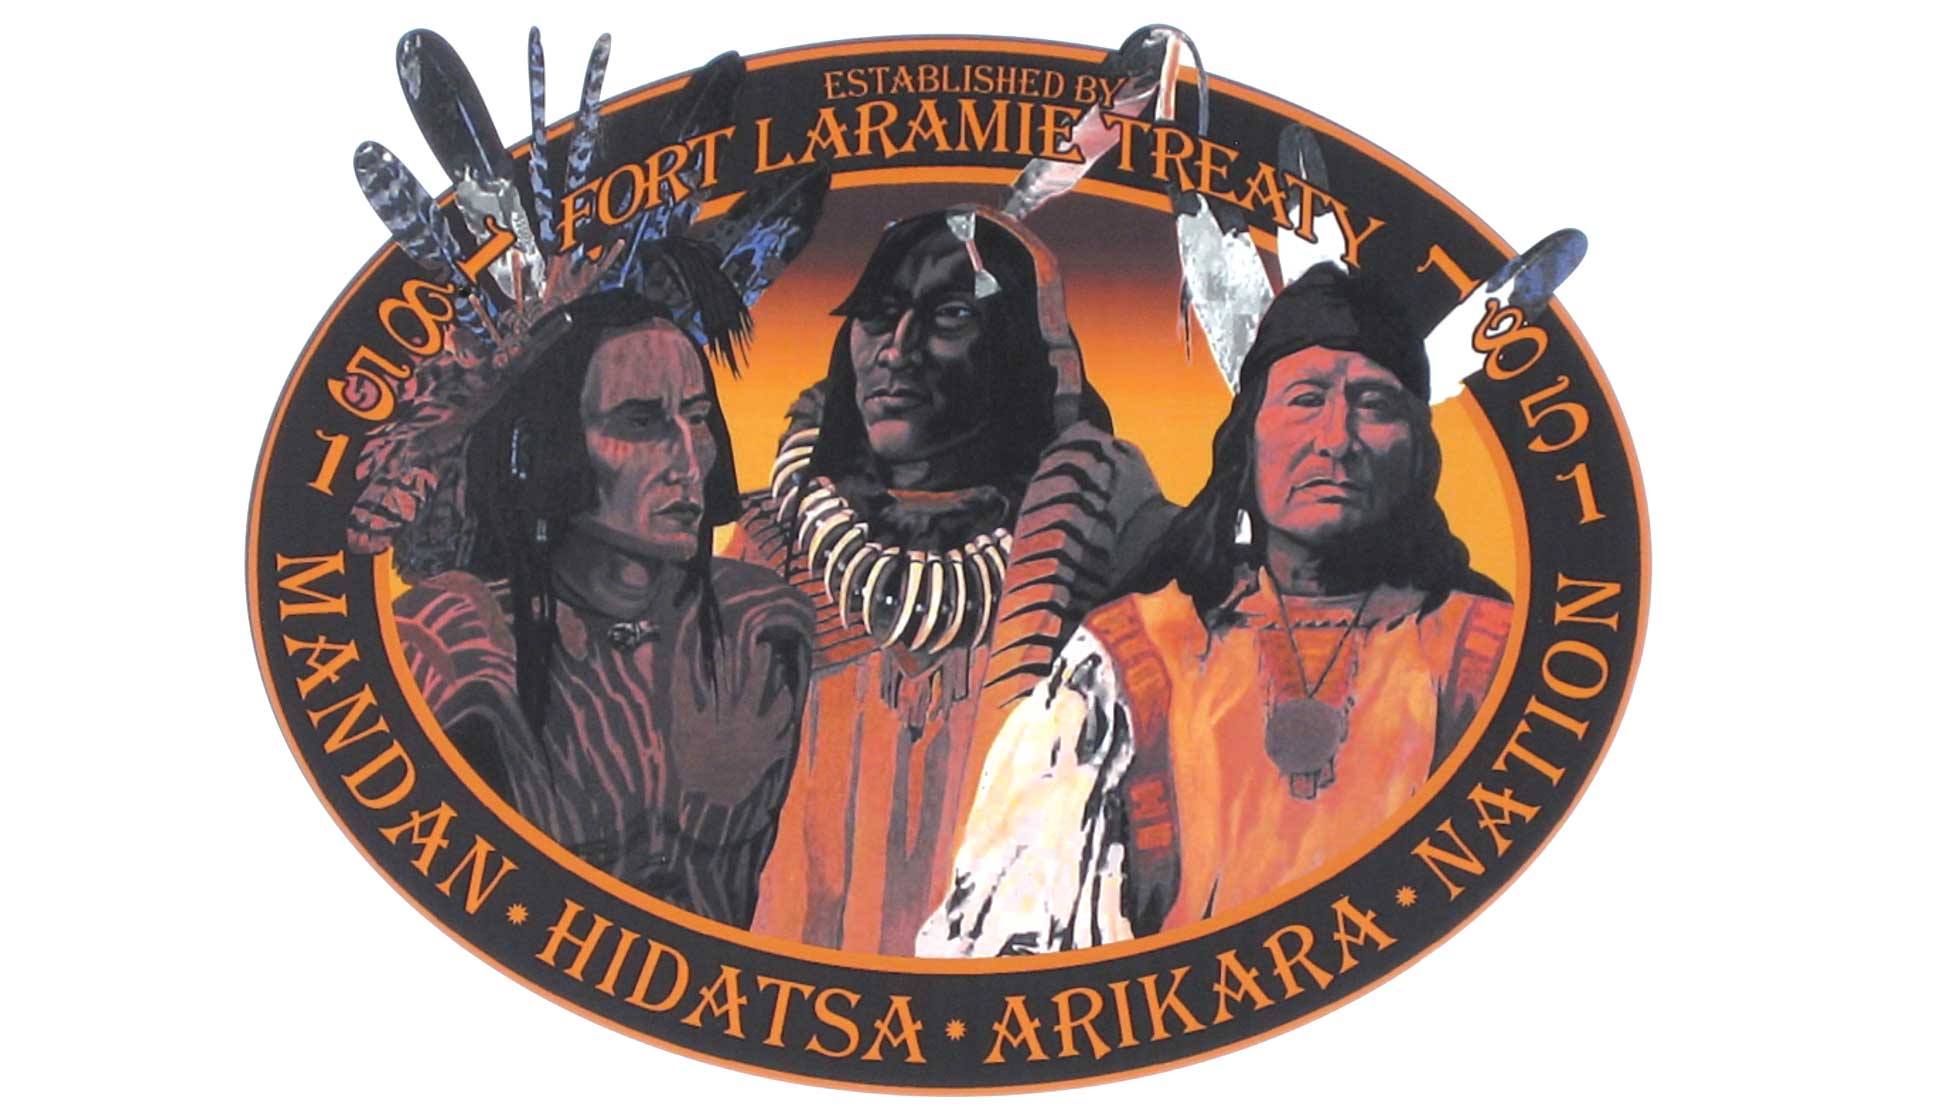 This attractive logo represents the Three Affiliated Tribes.